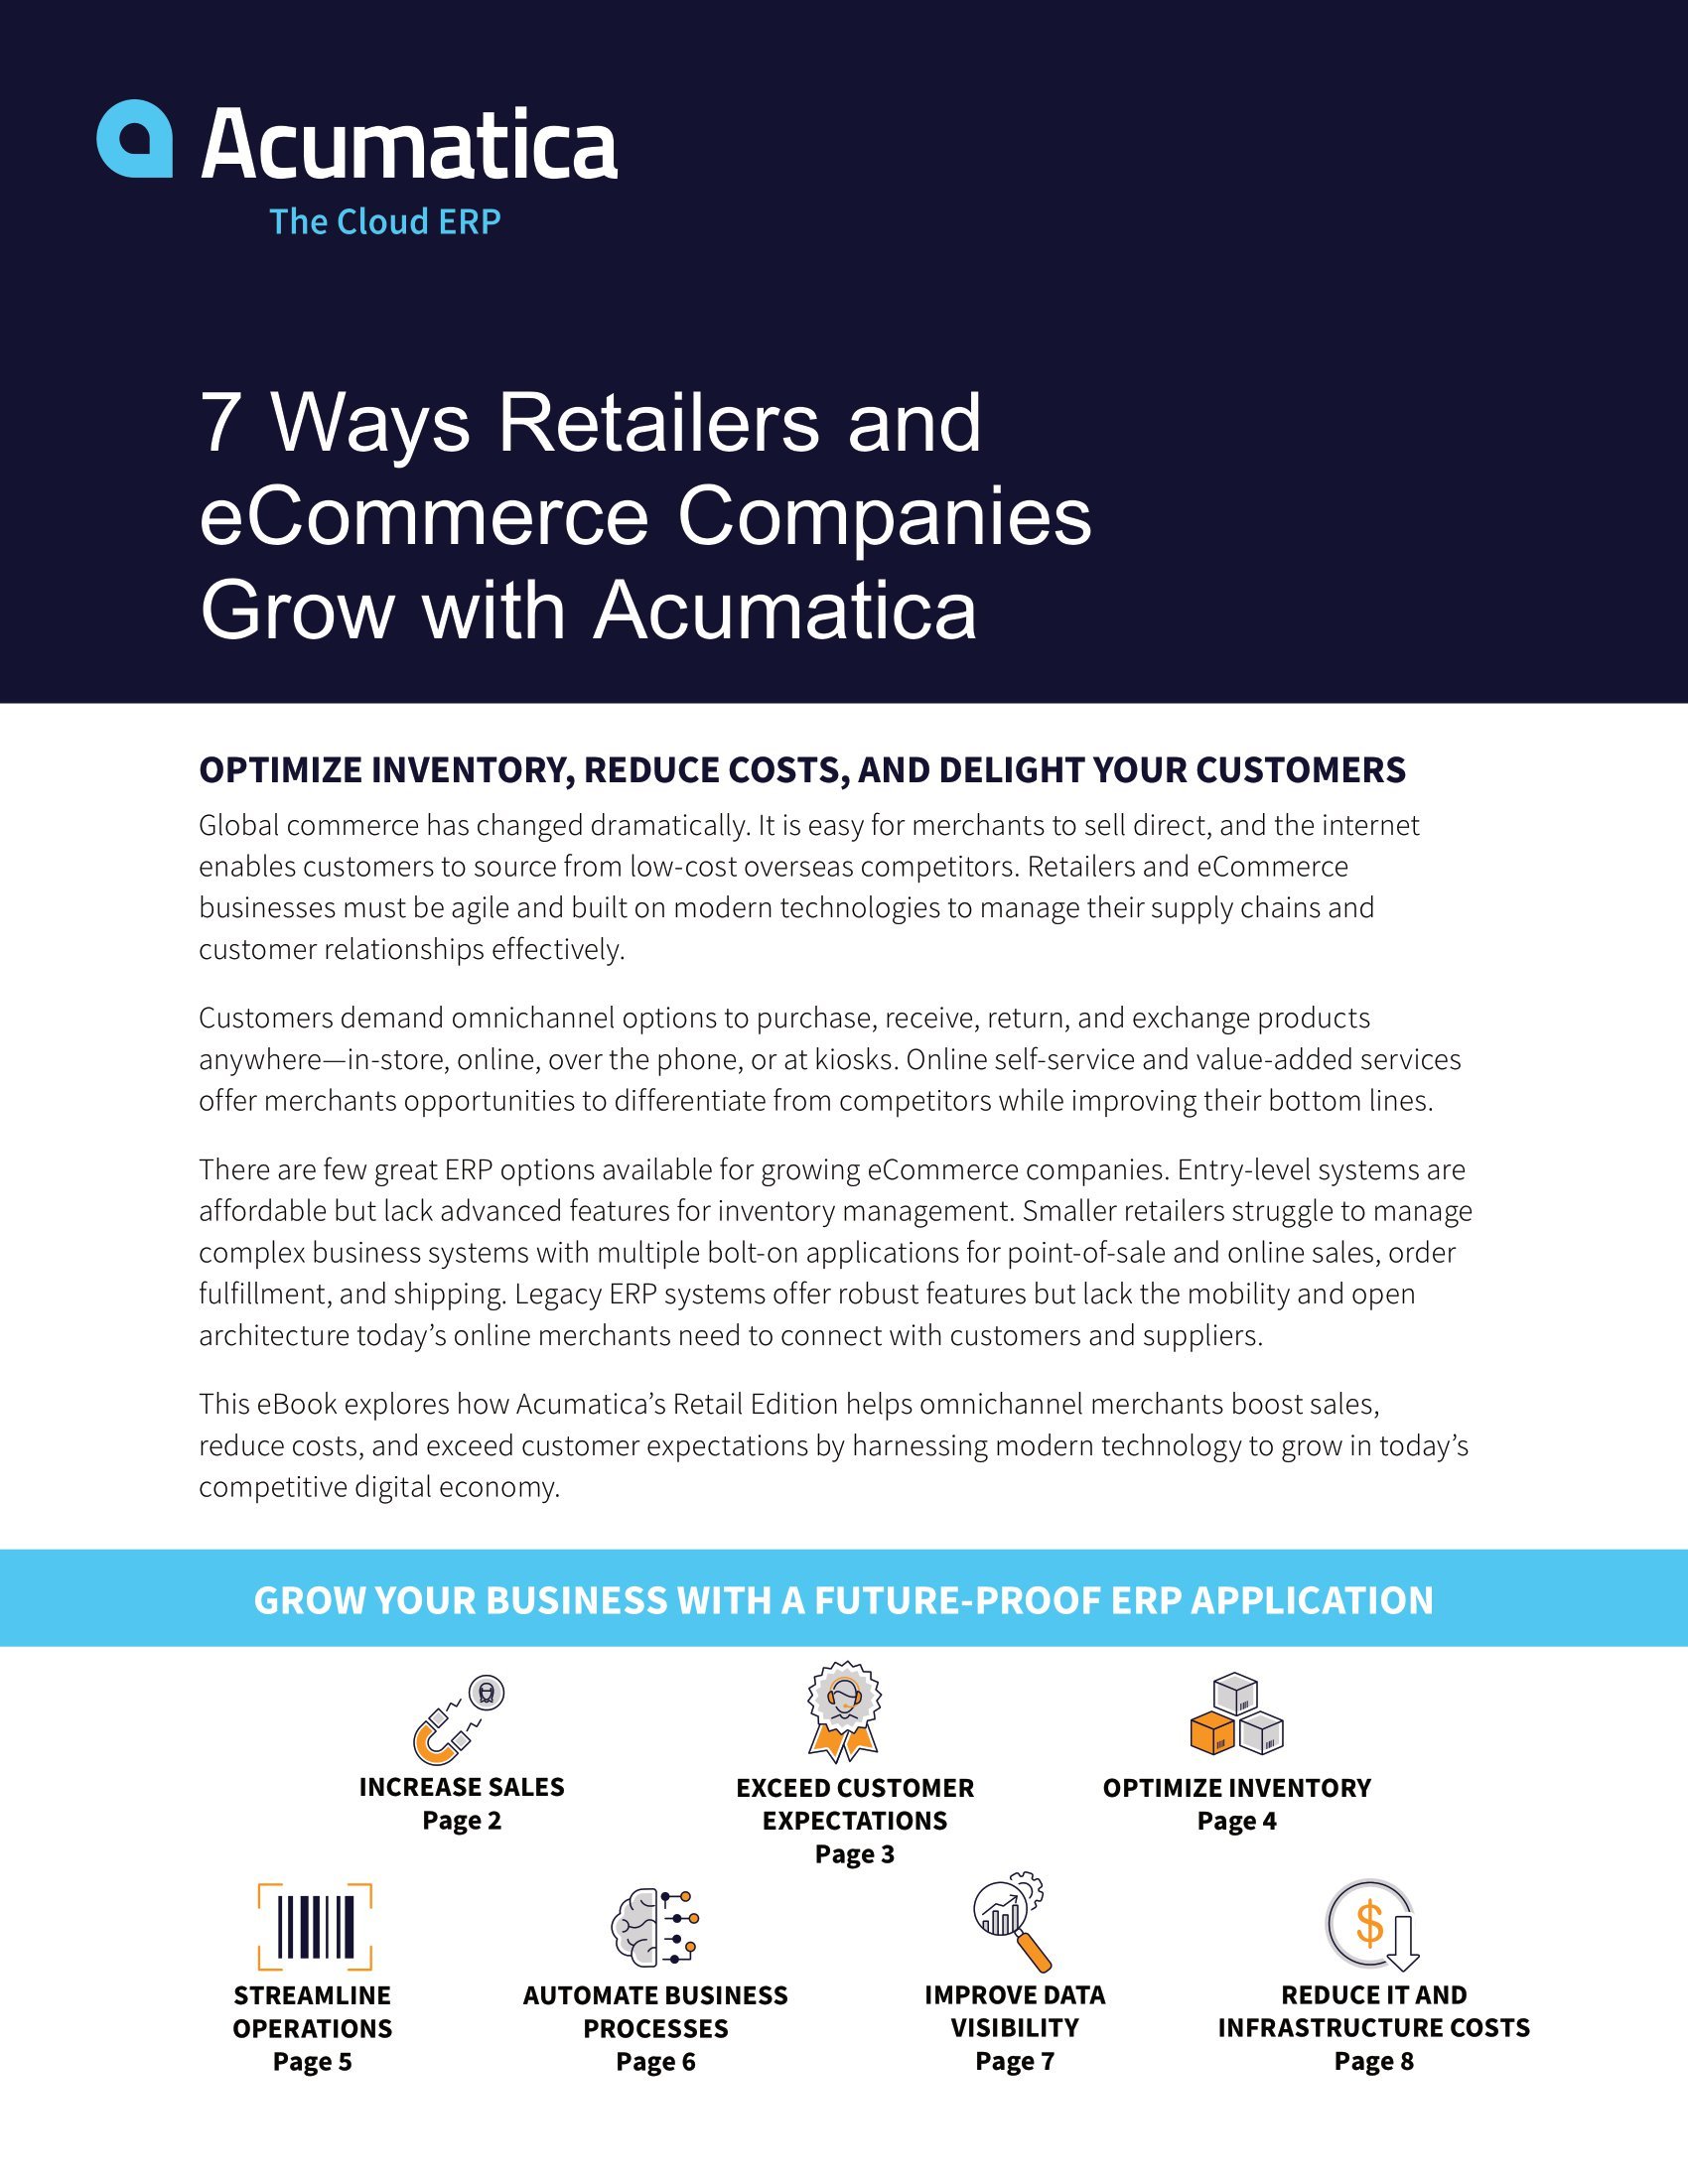 Powerful Growth for Retailers and eCommerce Companies with Acumatica’s Complete ERP Solution